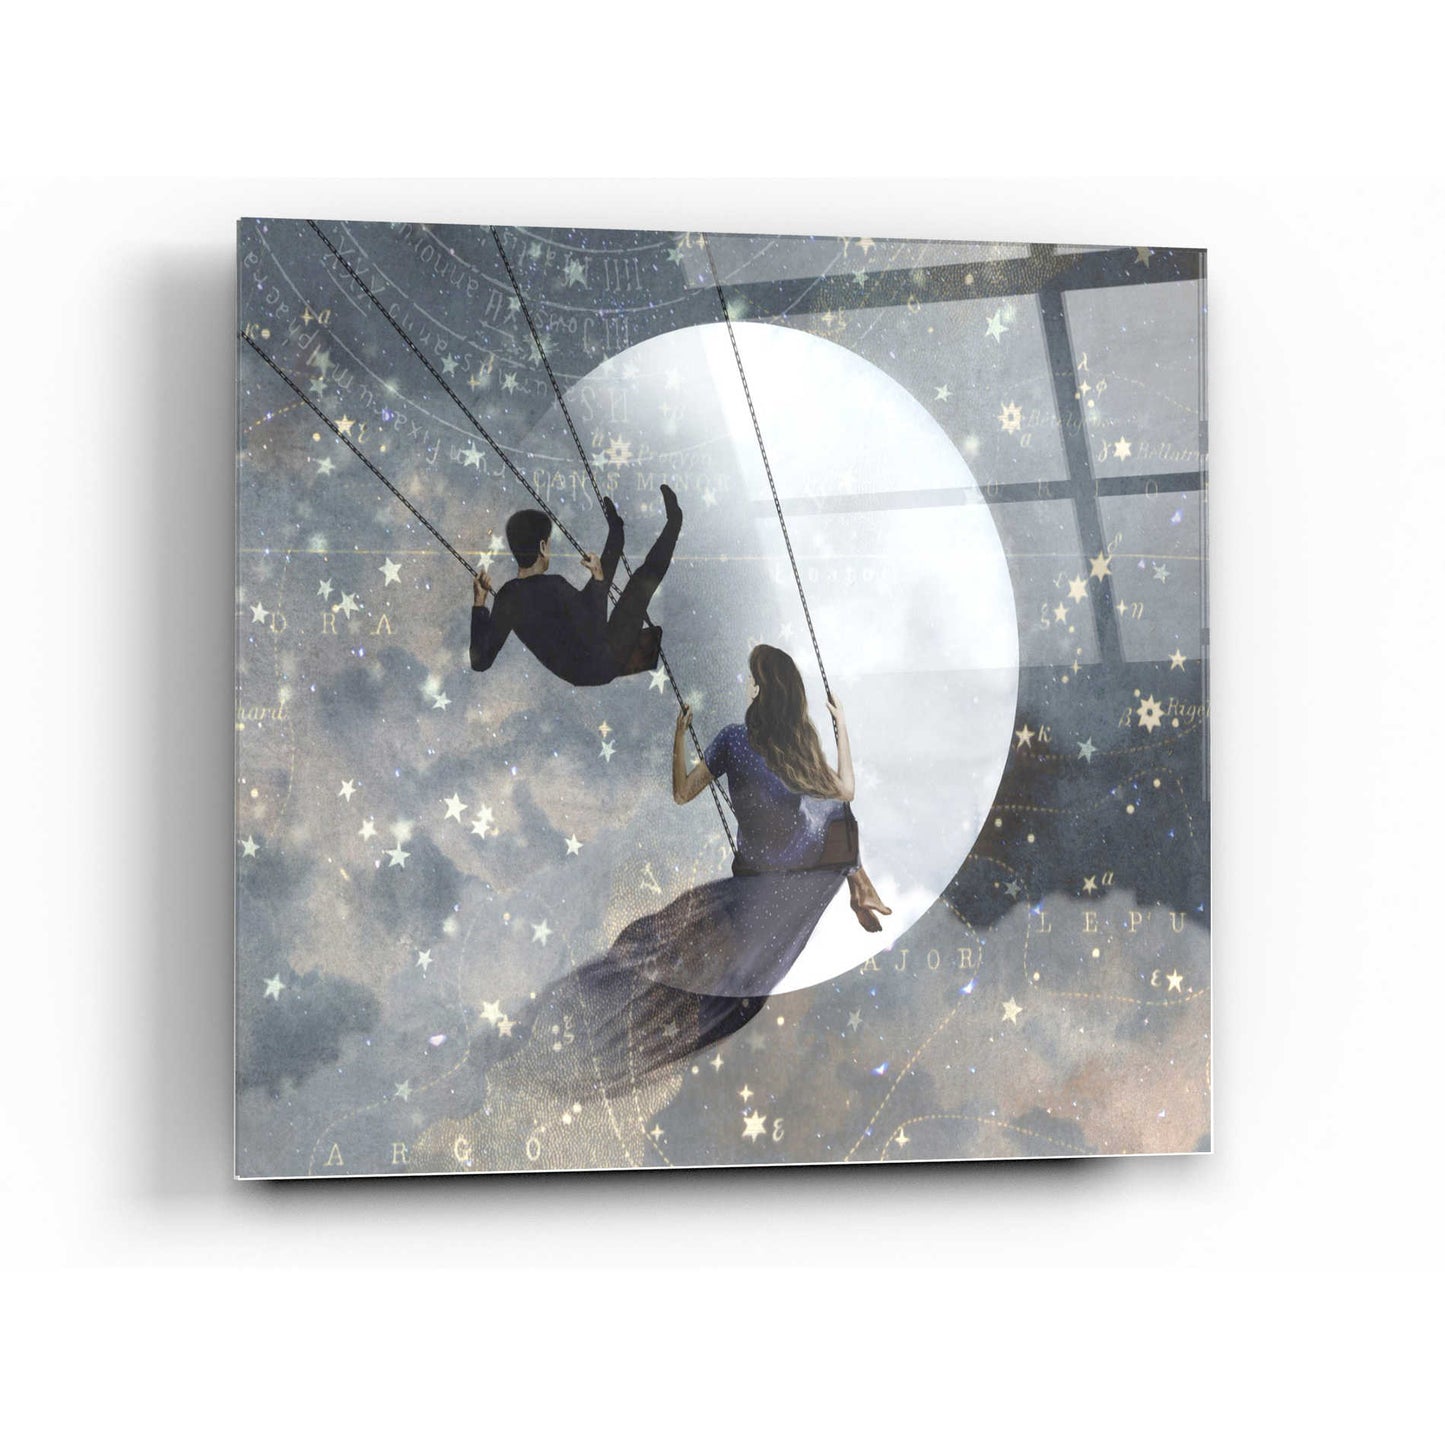 Epic Art 'Celestial Love II' by Victoria Borges Acrylic Glass Wall Art,12x12